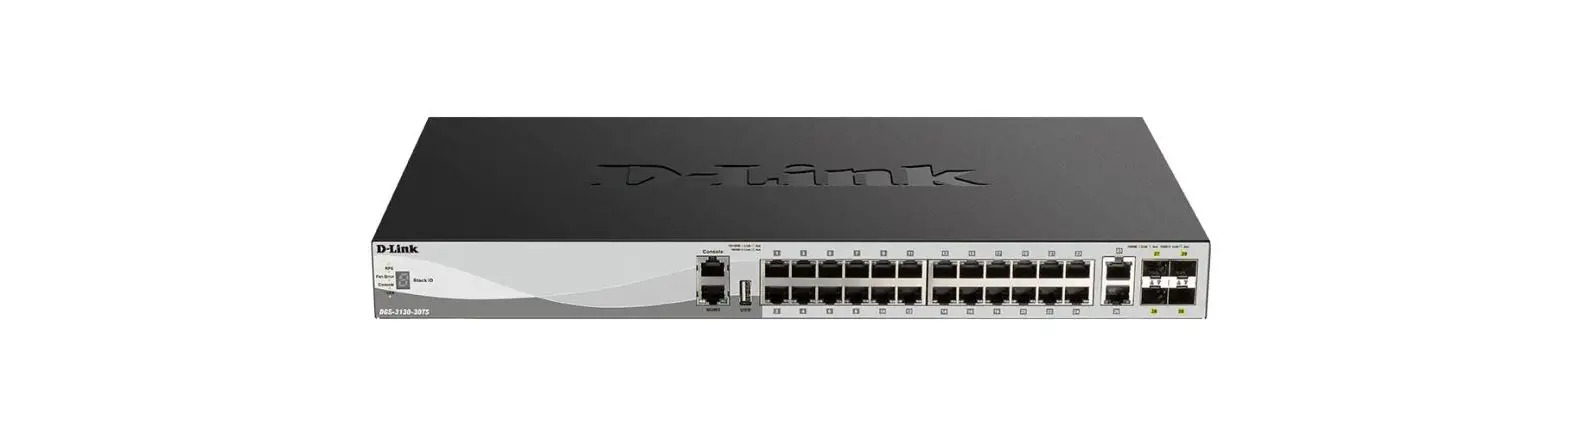 DGS-3130-30TS Stackable Managed Switch